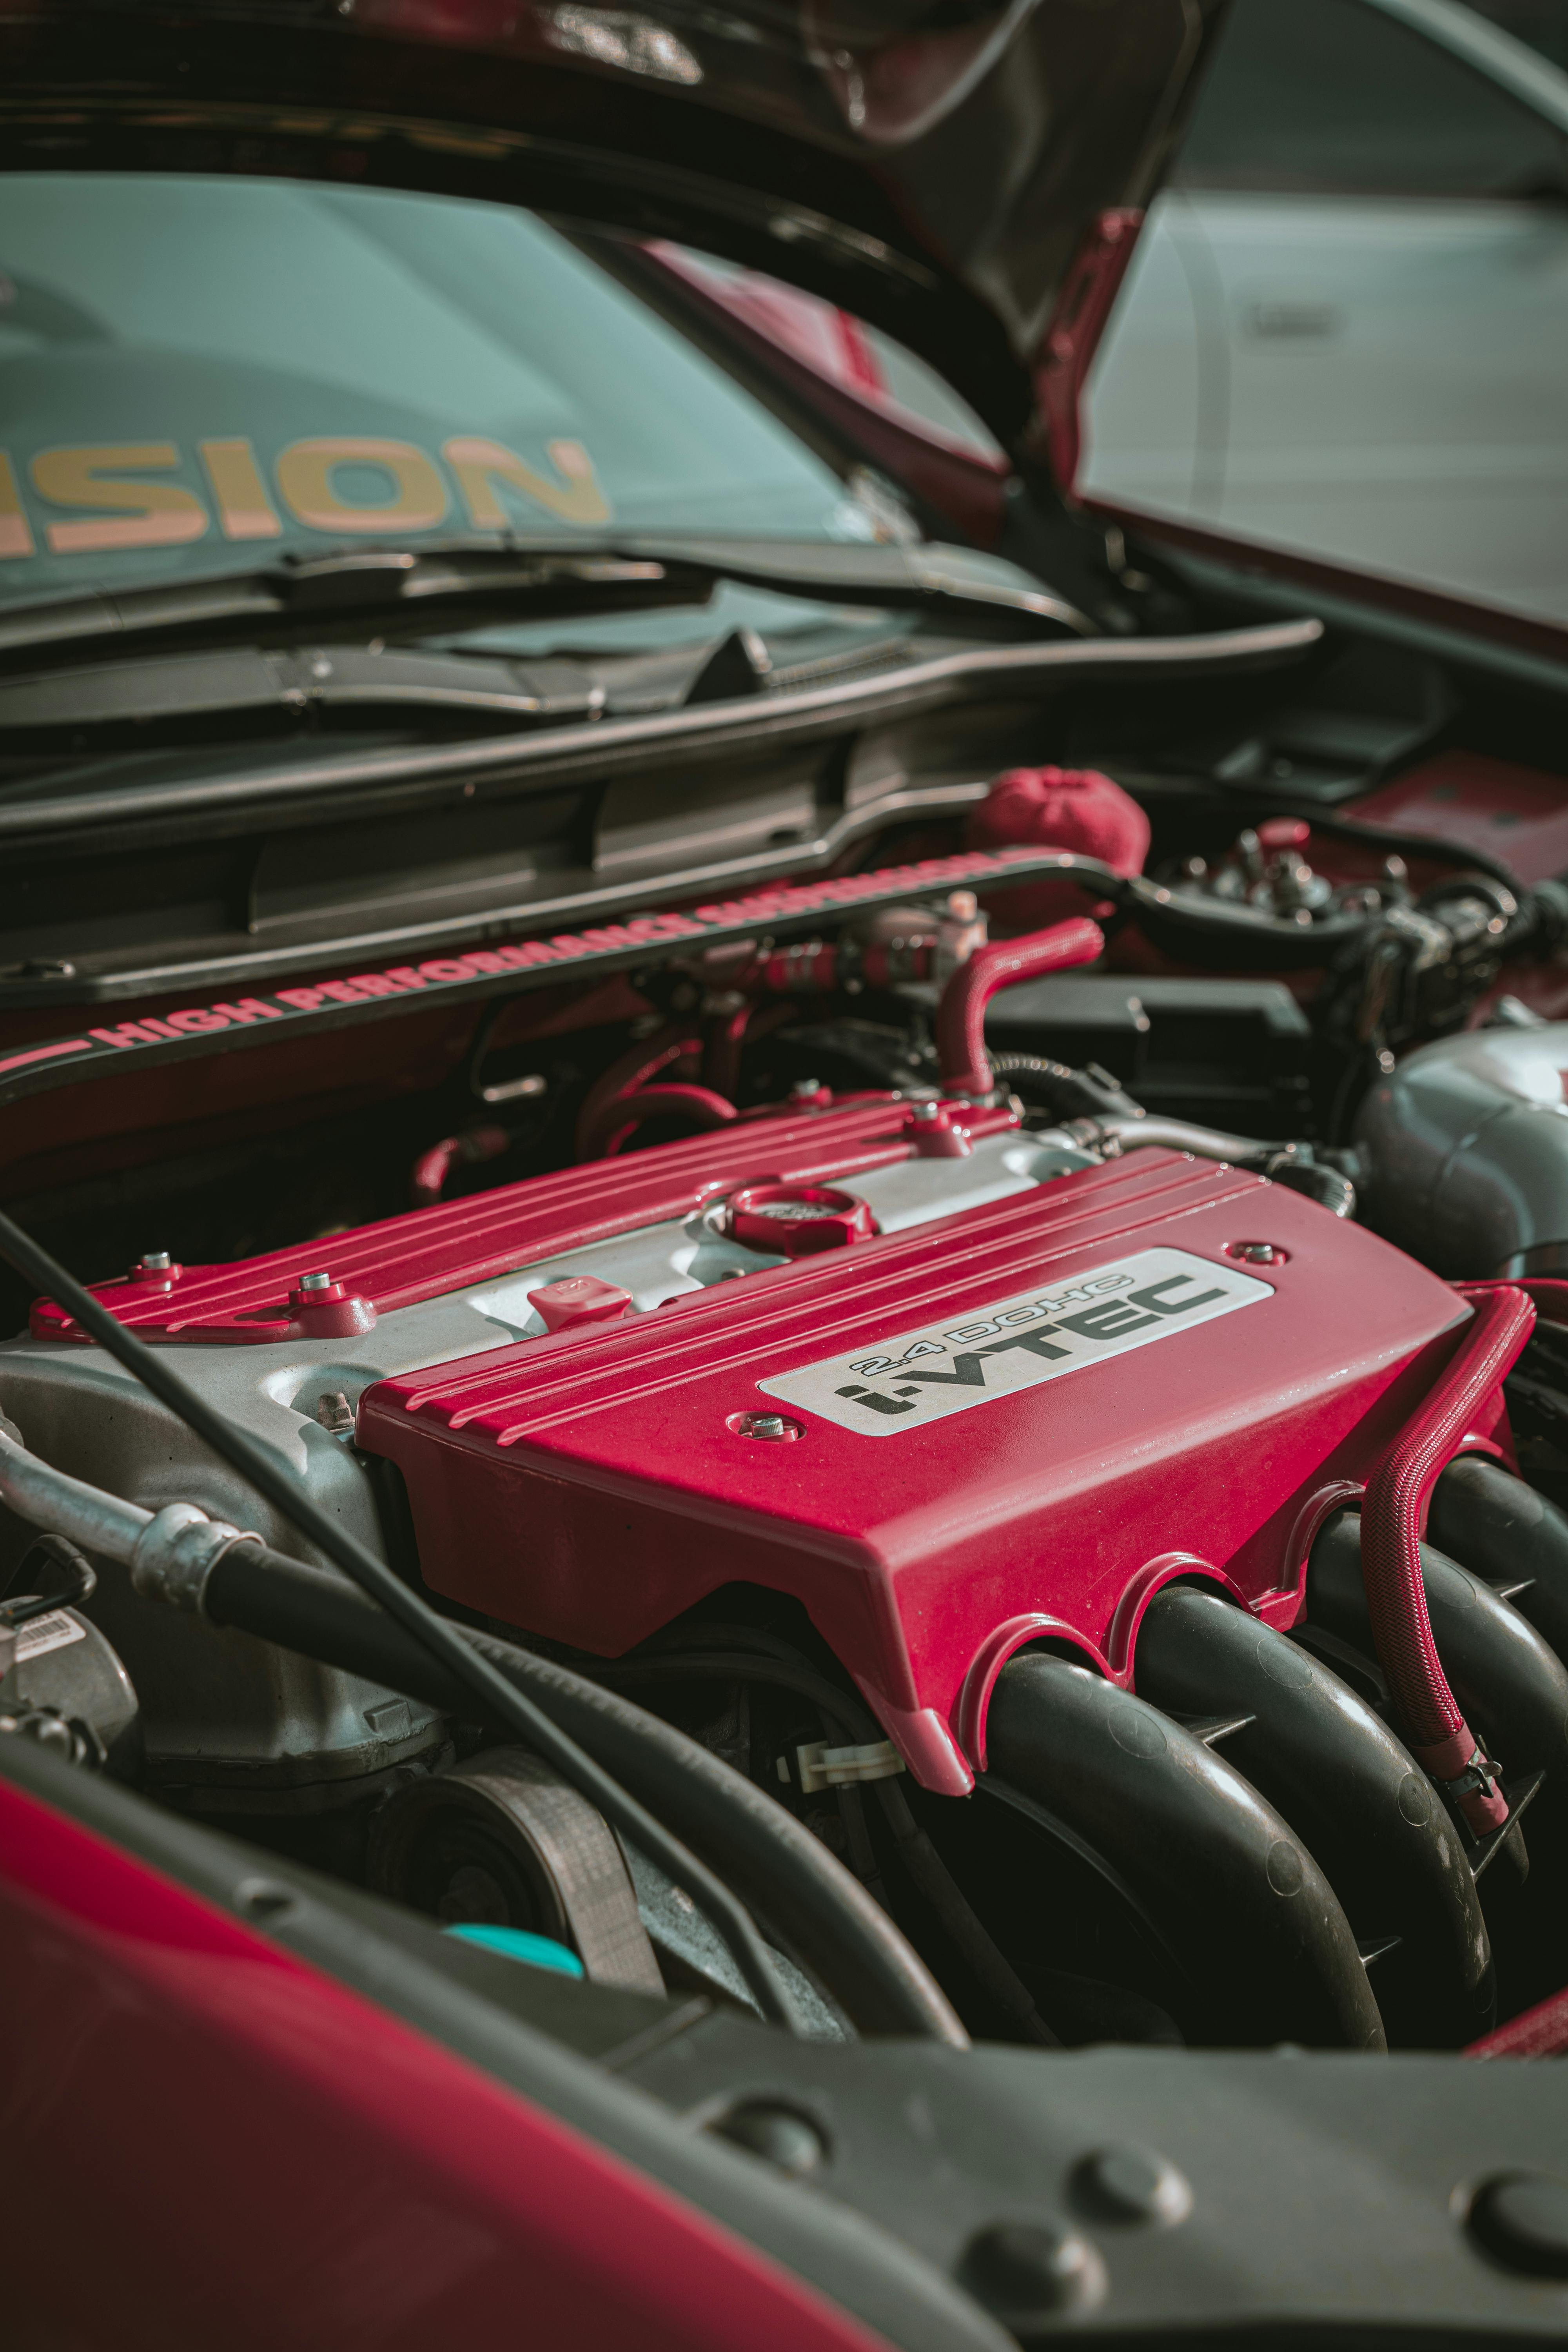 Red Car Engine Bay · Free Stock Photo